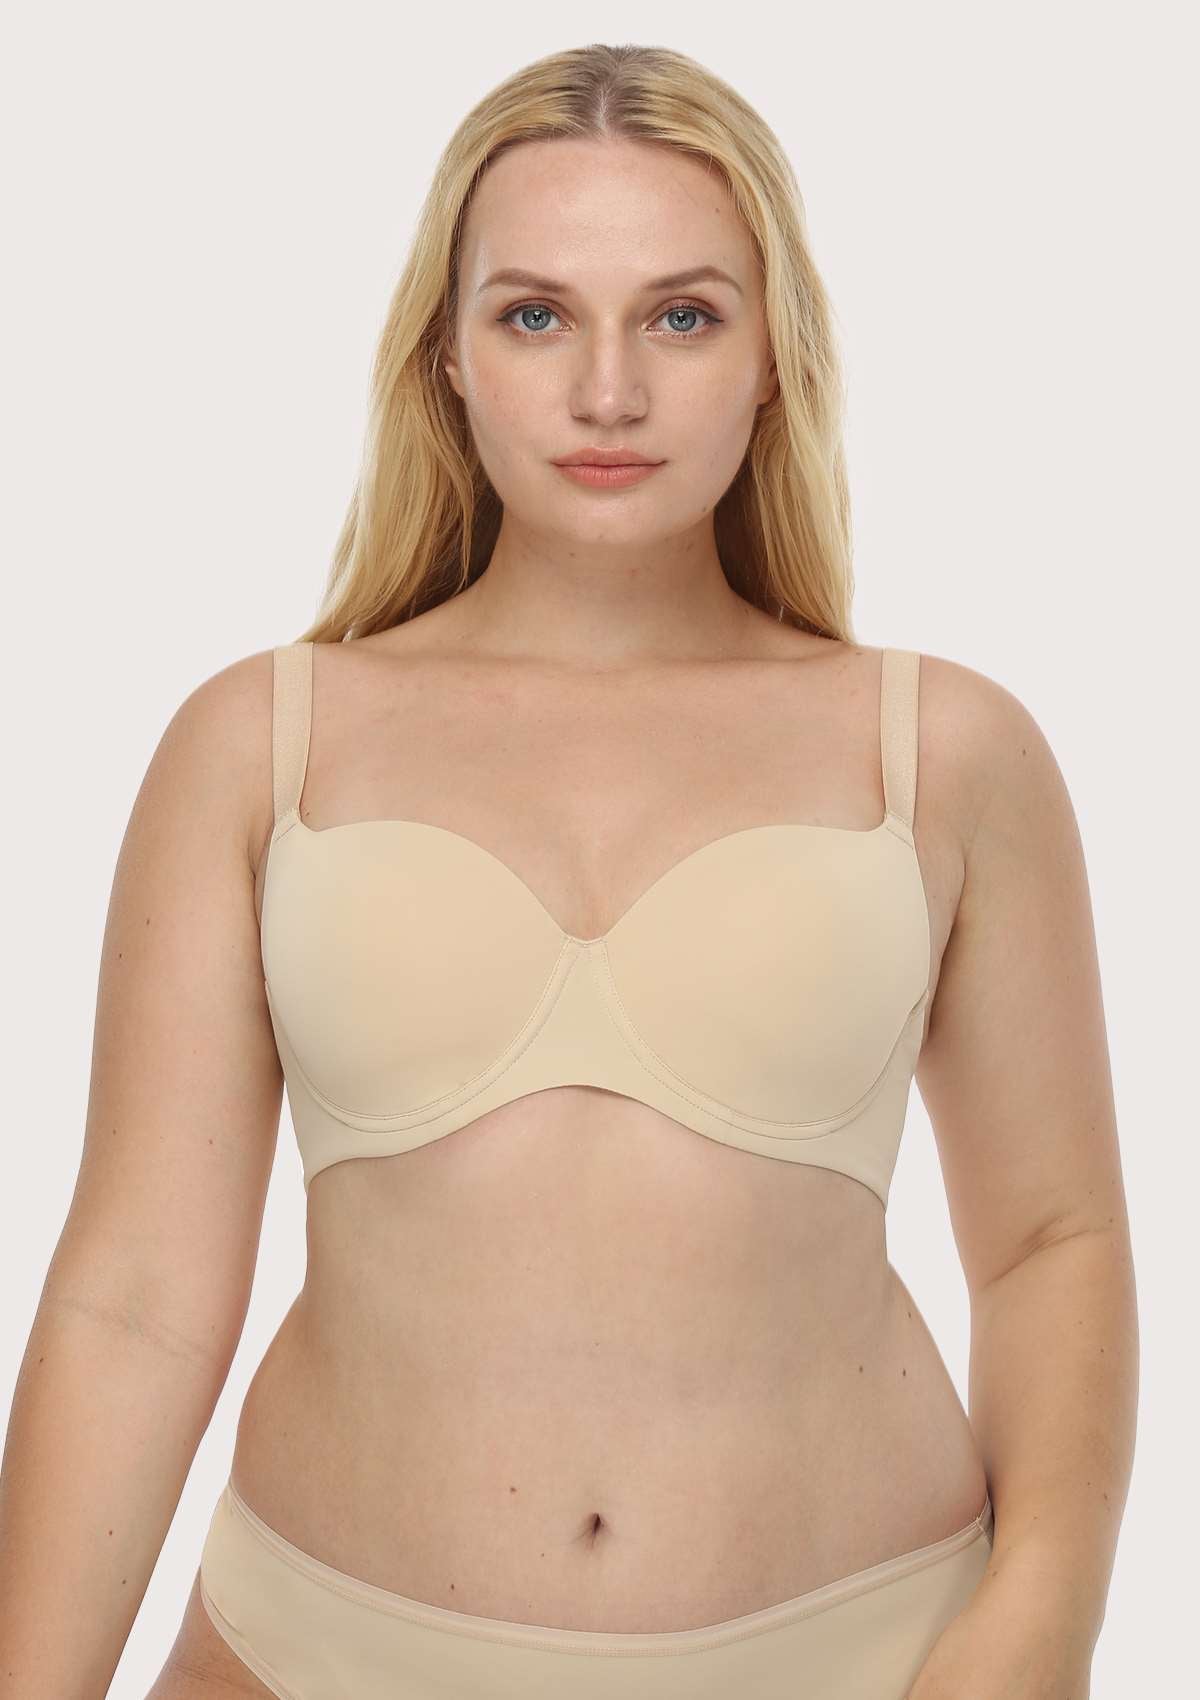 HSIA Gemma Smooth Padded T-shirt Everyday Bras - For Lift And Comfort - Beige / 36 / DD/E